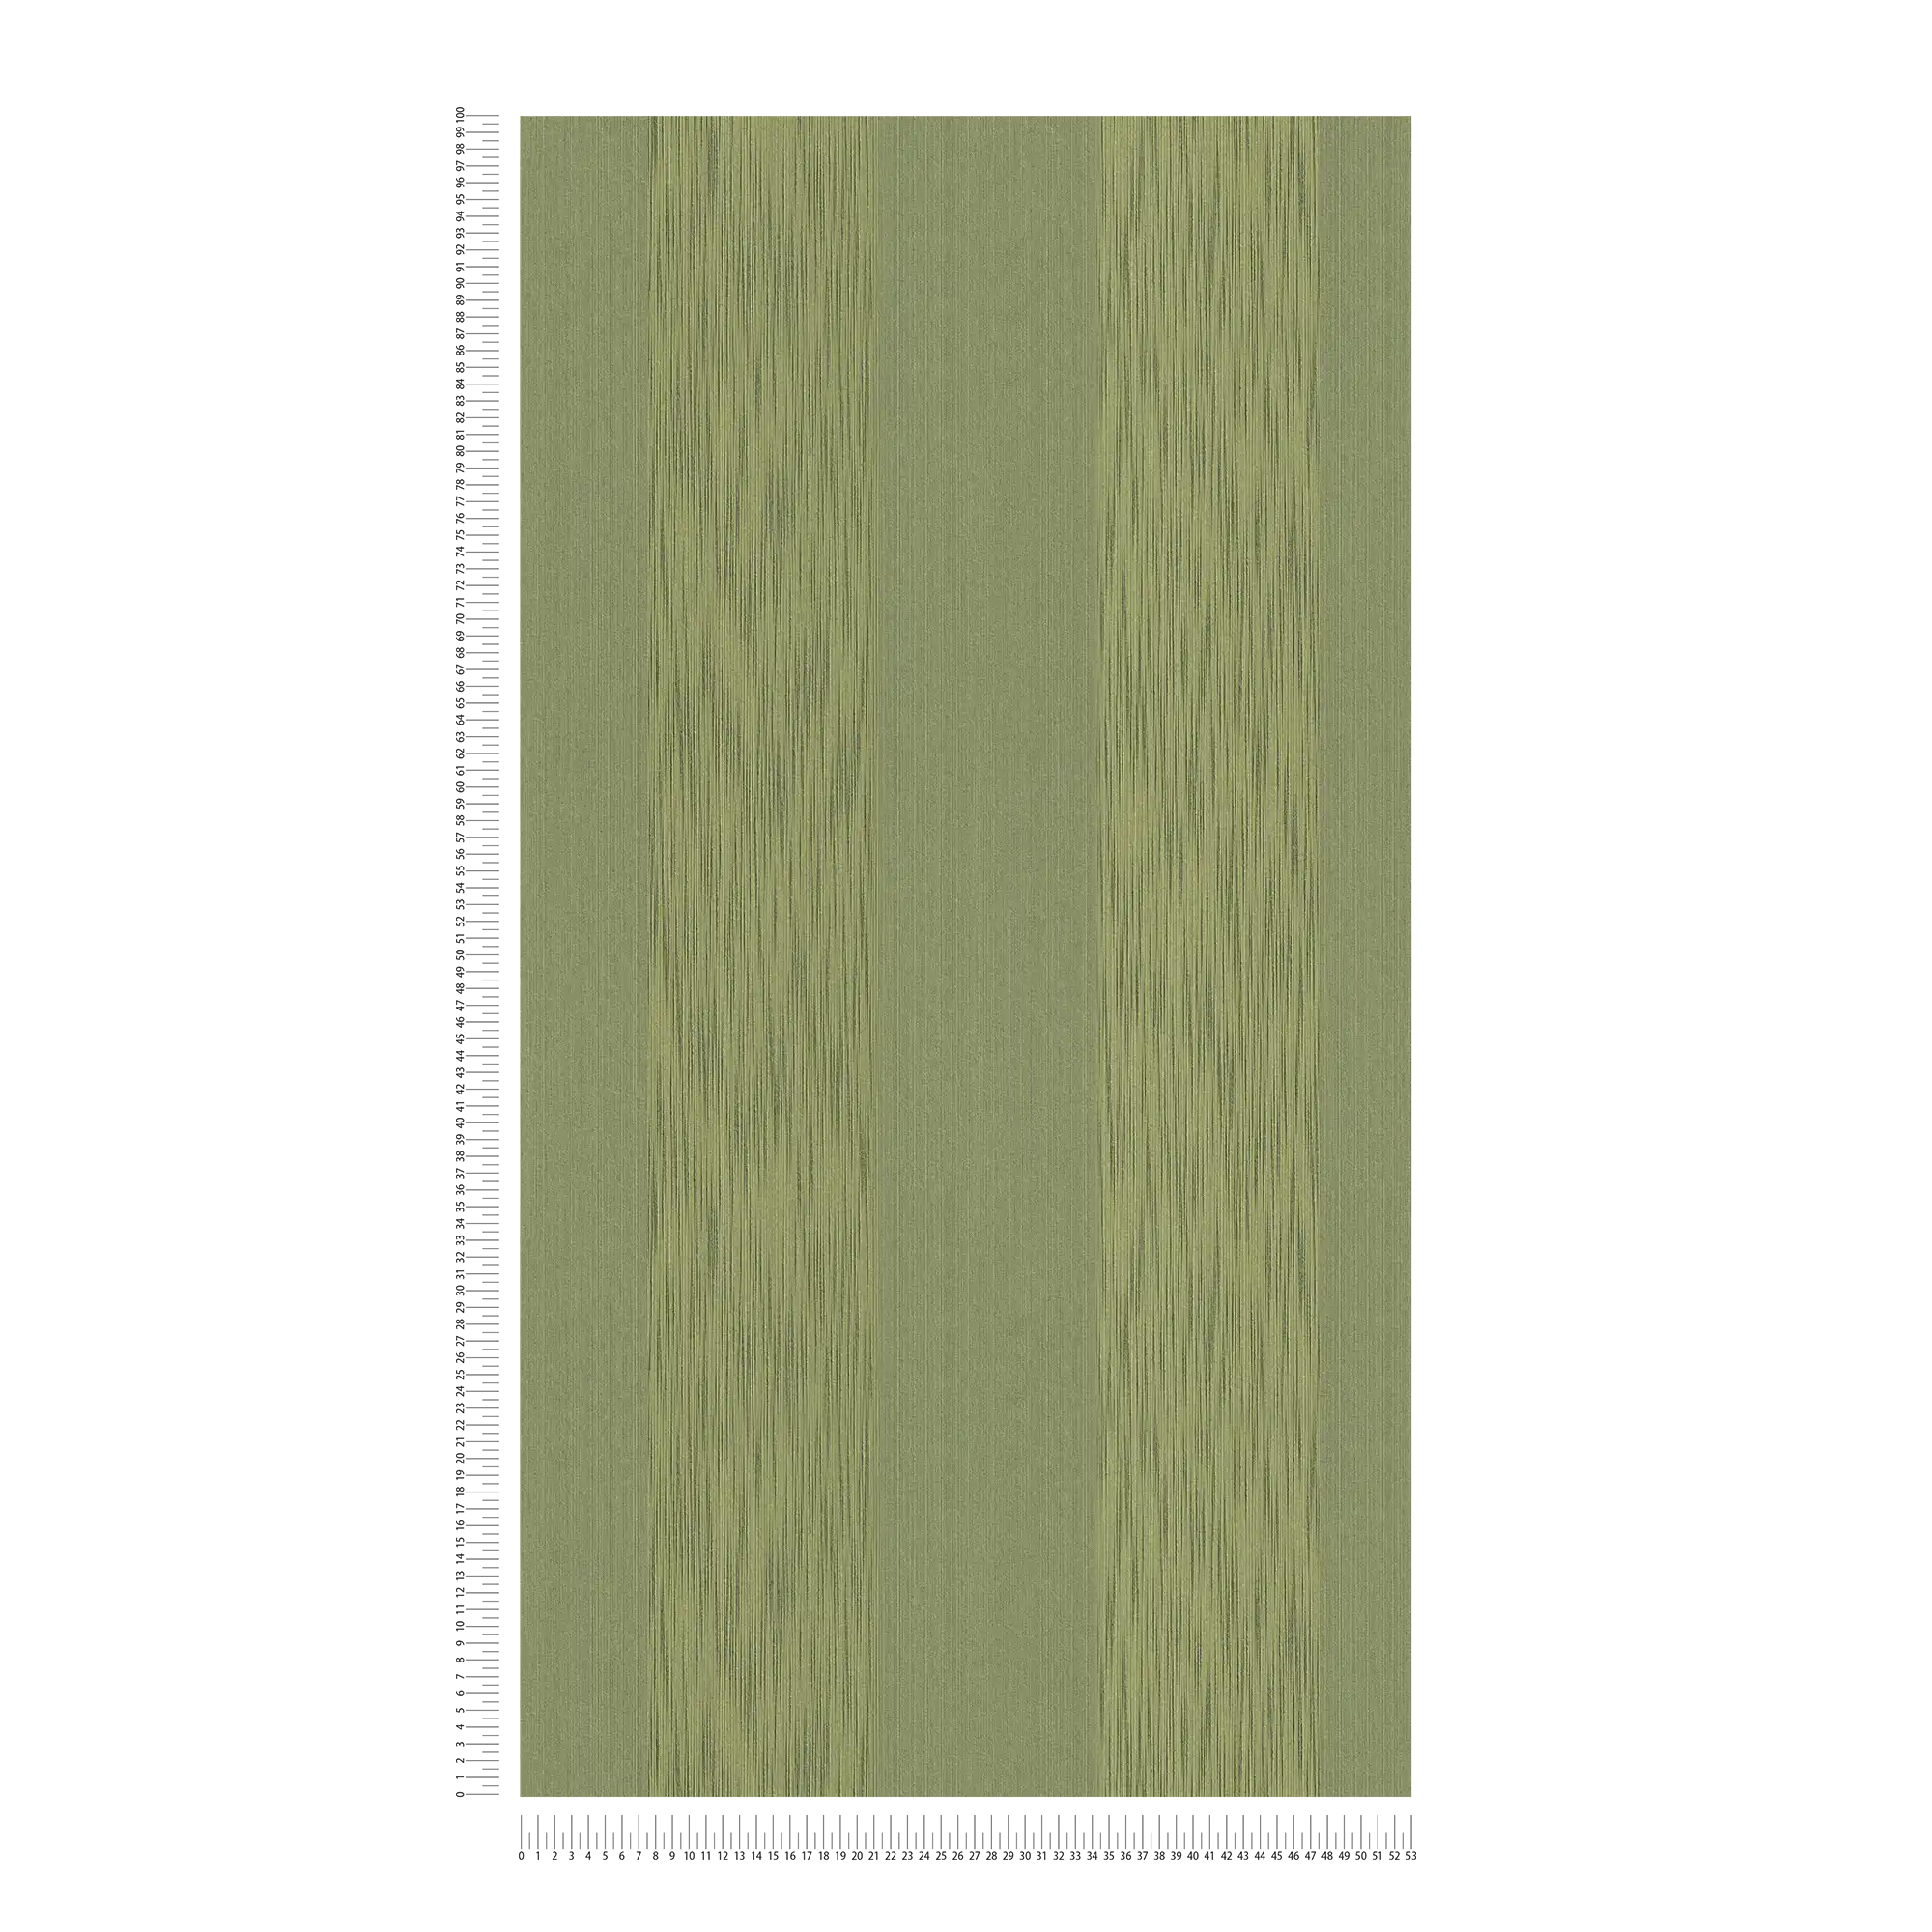             Textured wallpaper with metallic effect & striped pattern - green
        